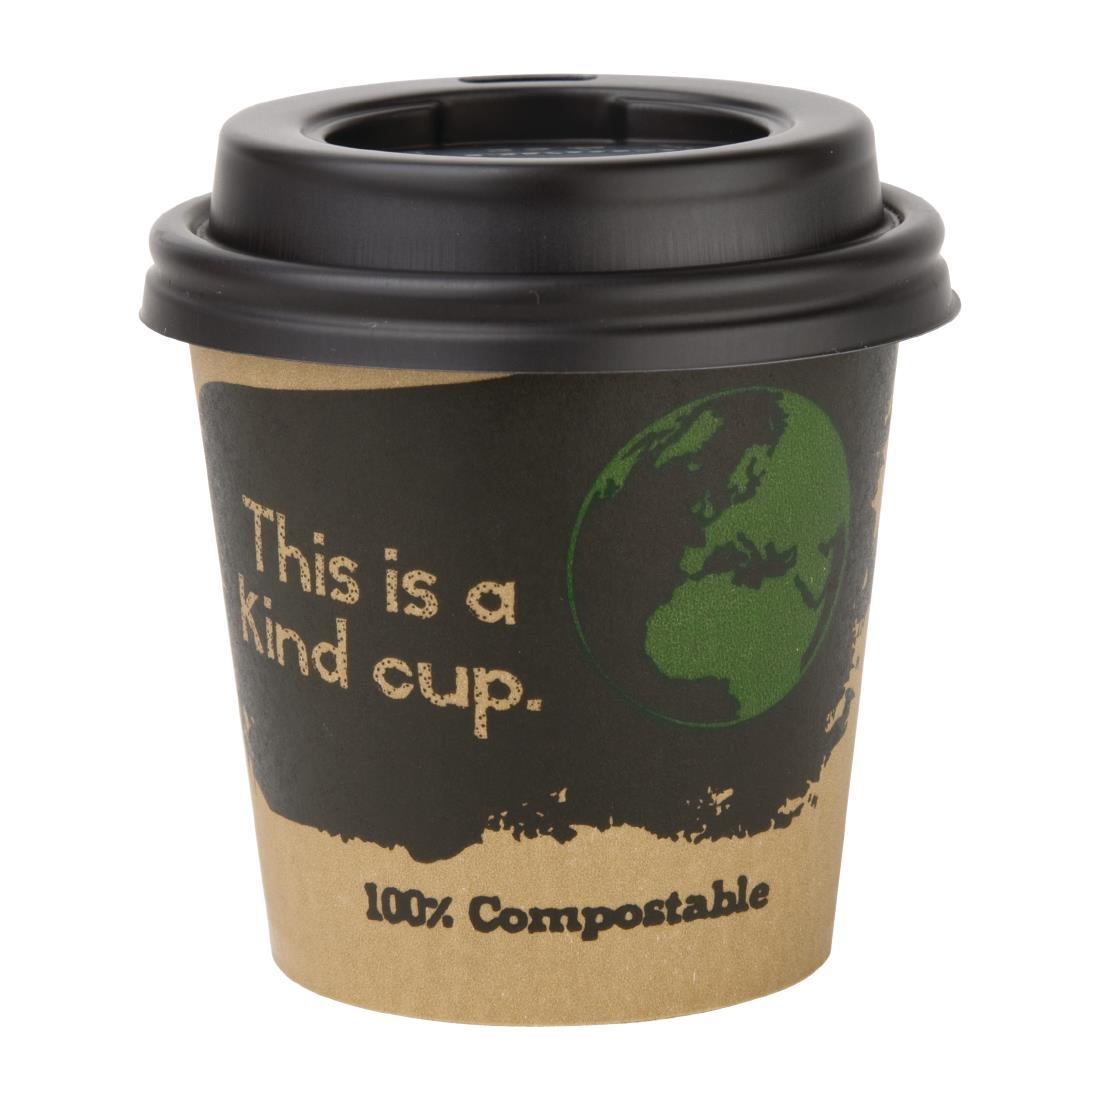 Fiesta Compostable Espresso Cup Lids 113ml / 4oz (Pack of 1000) - DY983  - 2